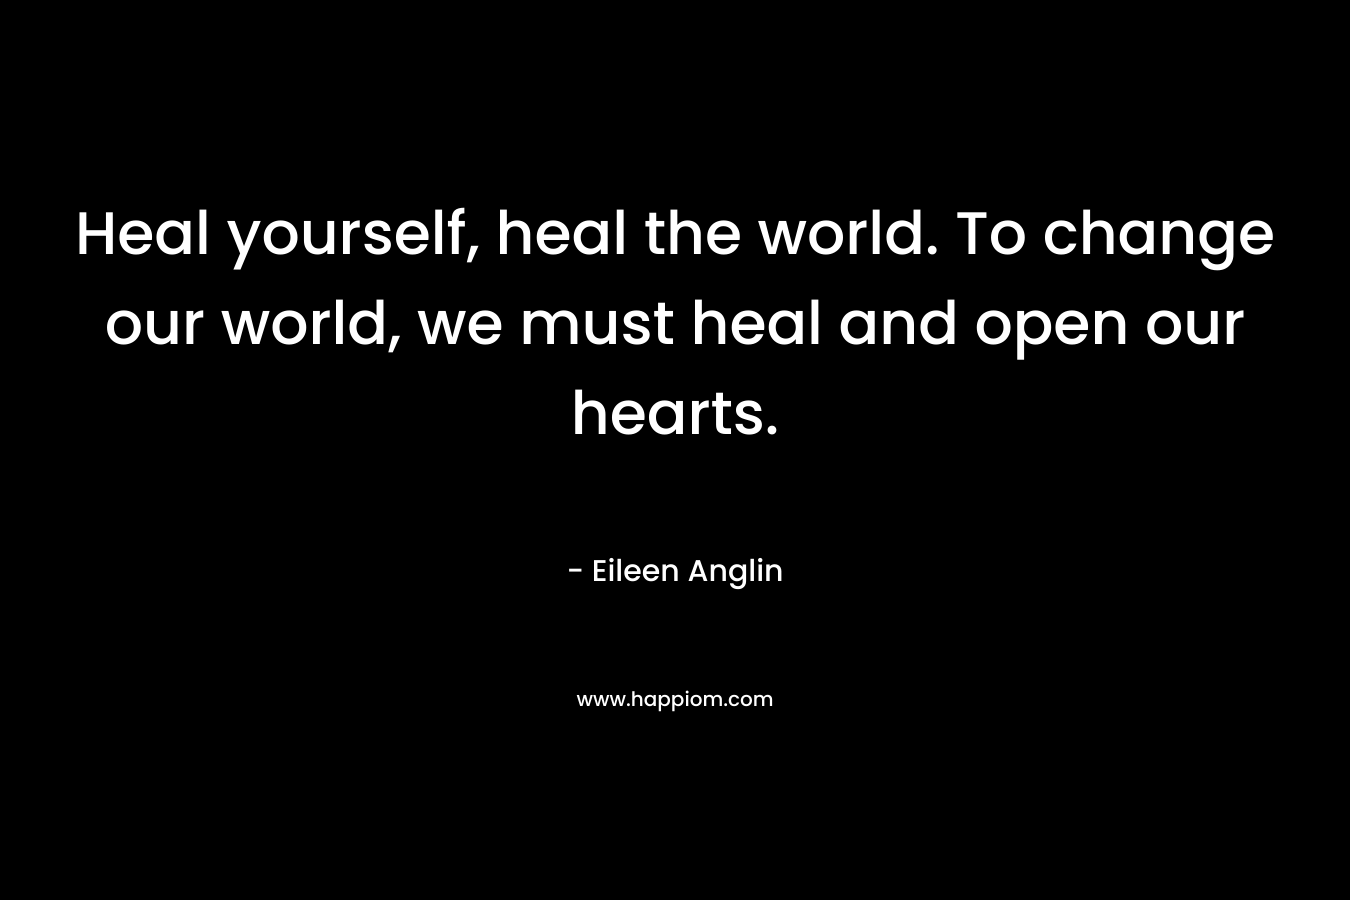 Heal yourself, heal the world. To change our world, we must heal and open our hearts. – Eileen Anglin